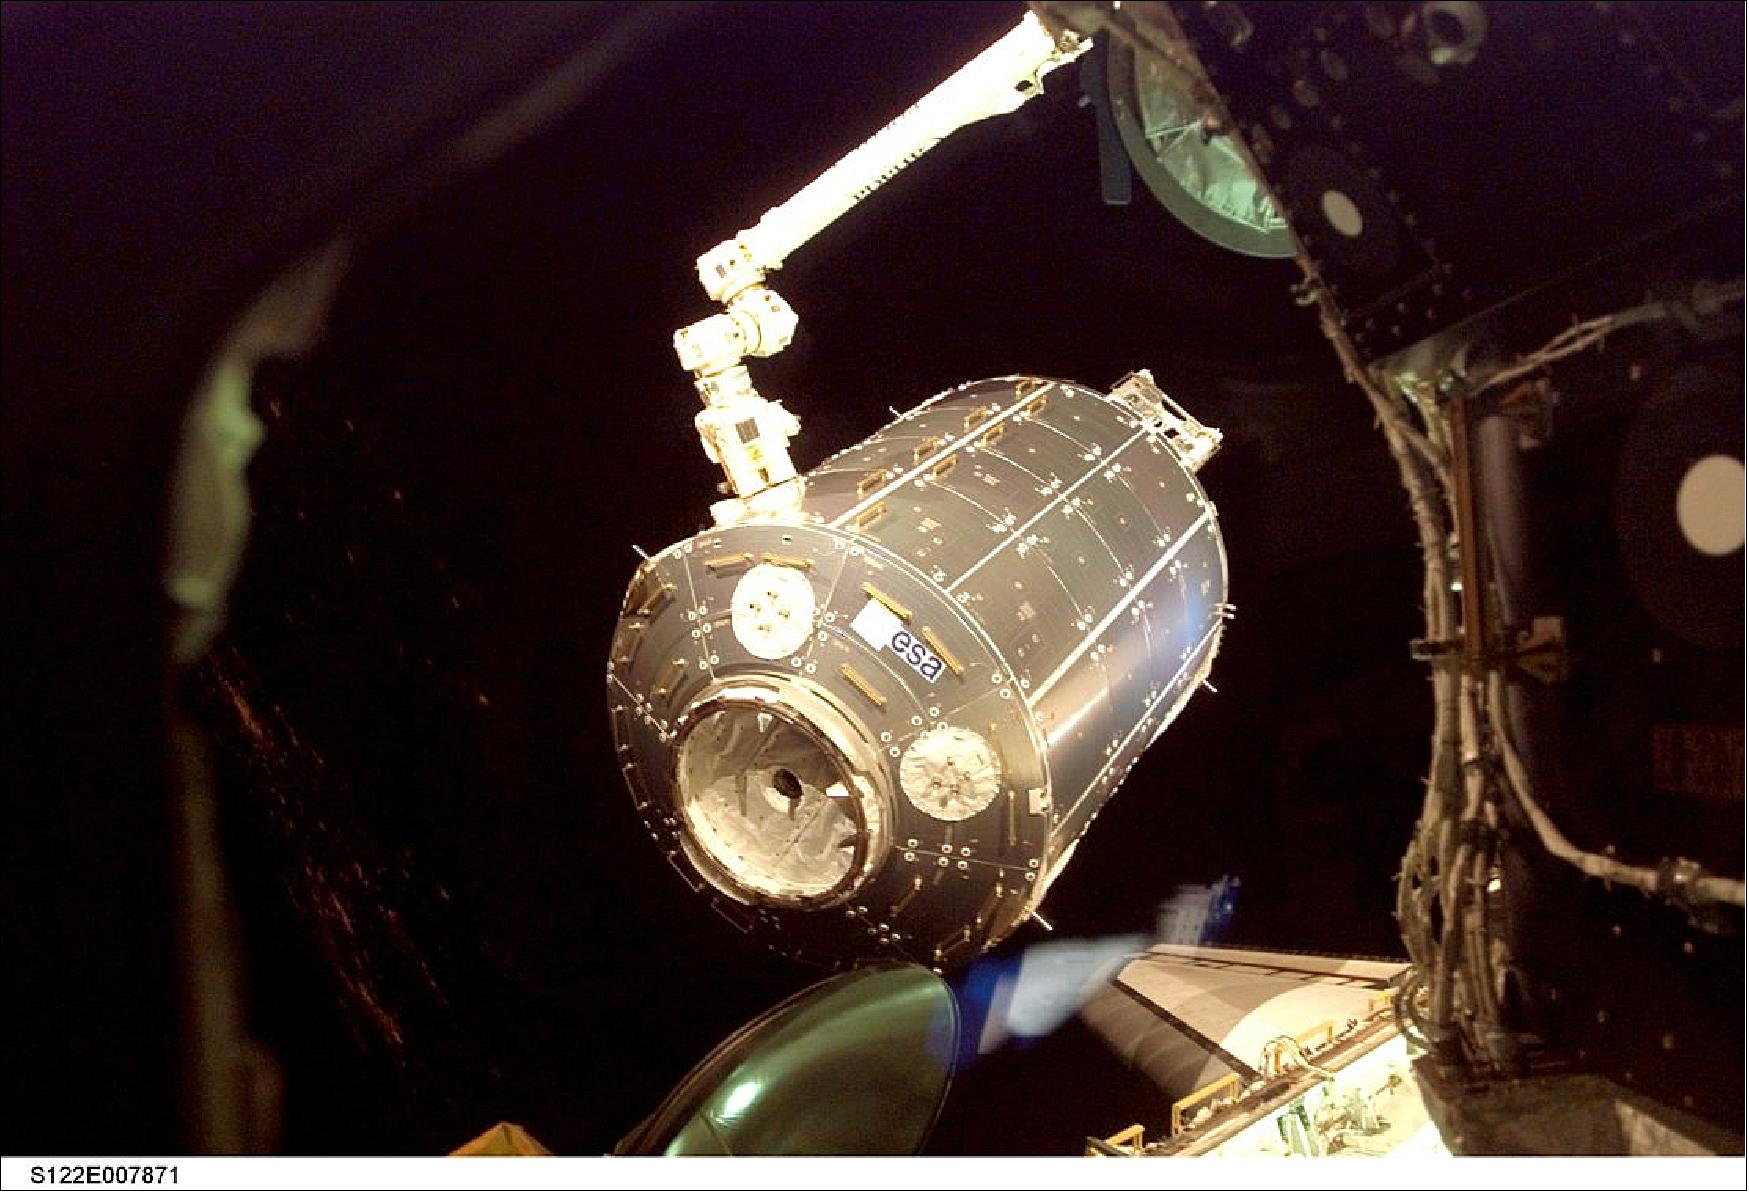 Figure 26: The European Columbus laboratory is lifted out of the Shuttle payload bay, prior to attachment to the International Space Station (image credit: NASA)